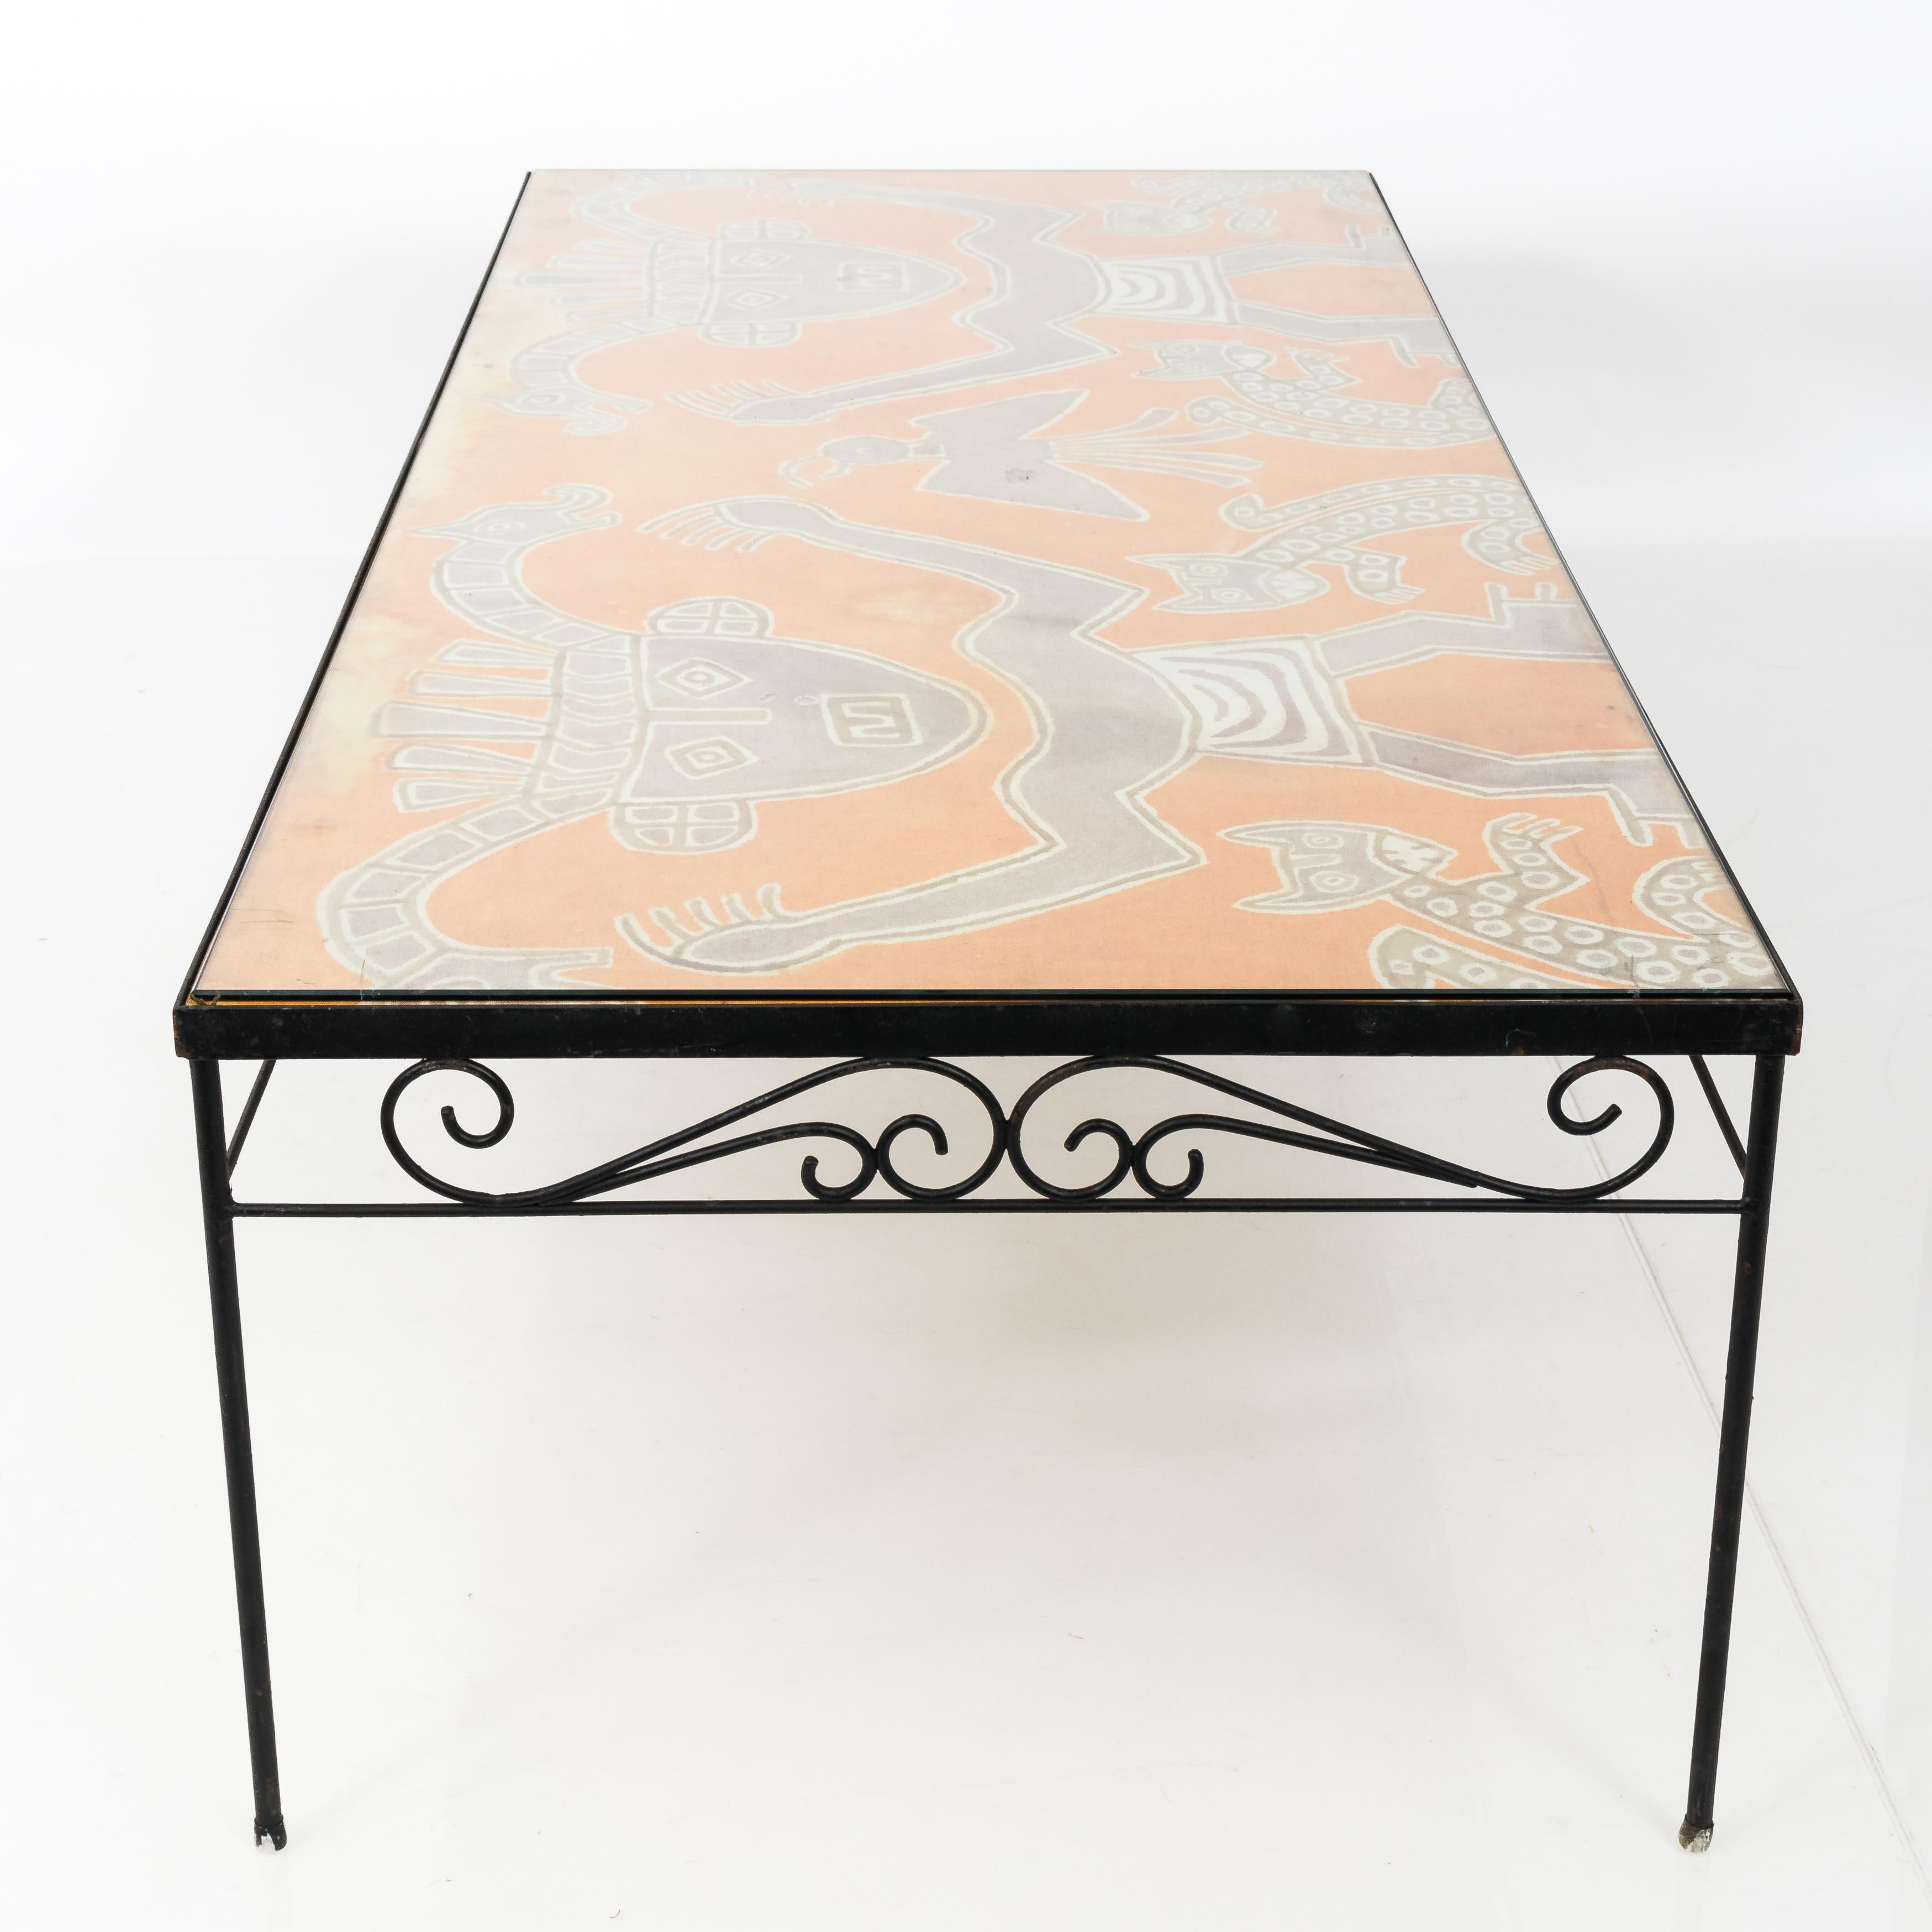 1960s Peruvian Pre-Colombian Textile Wrought Iron Coffee Table (Peruanisch)